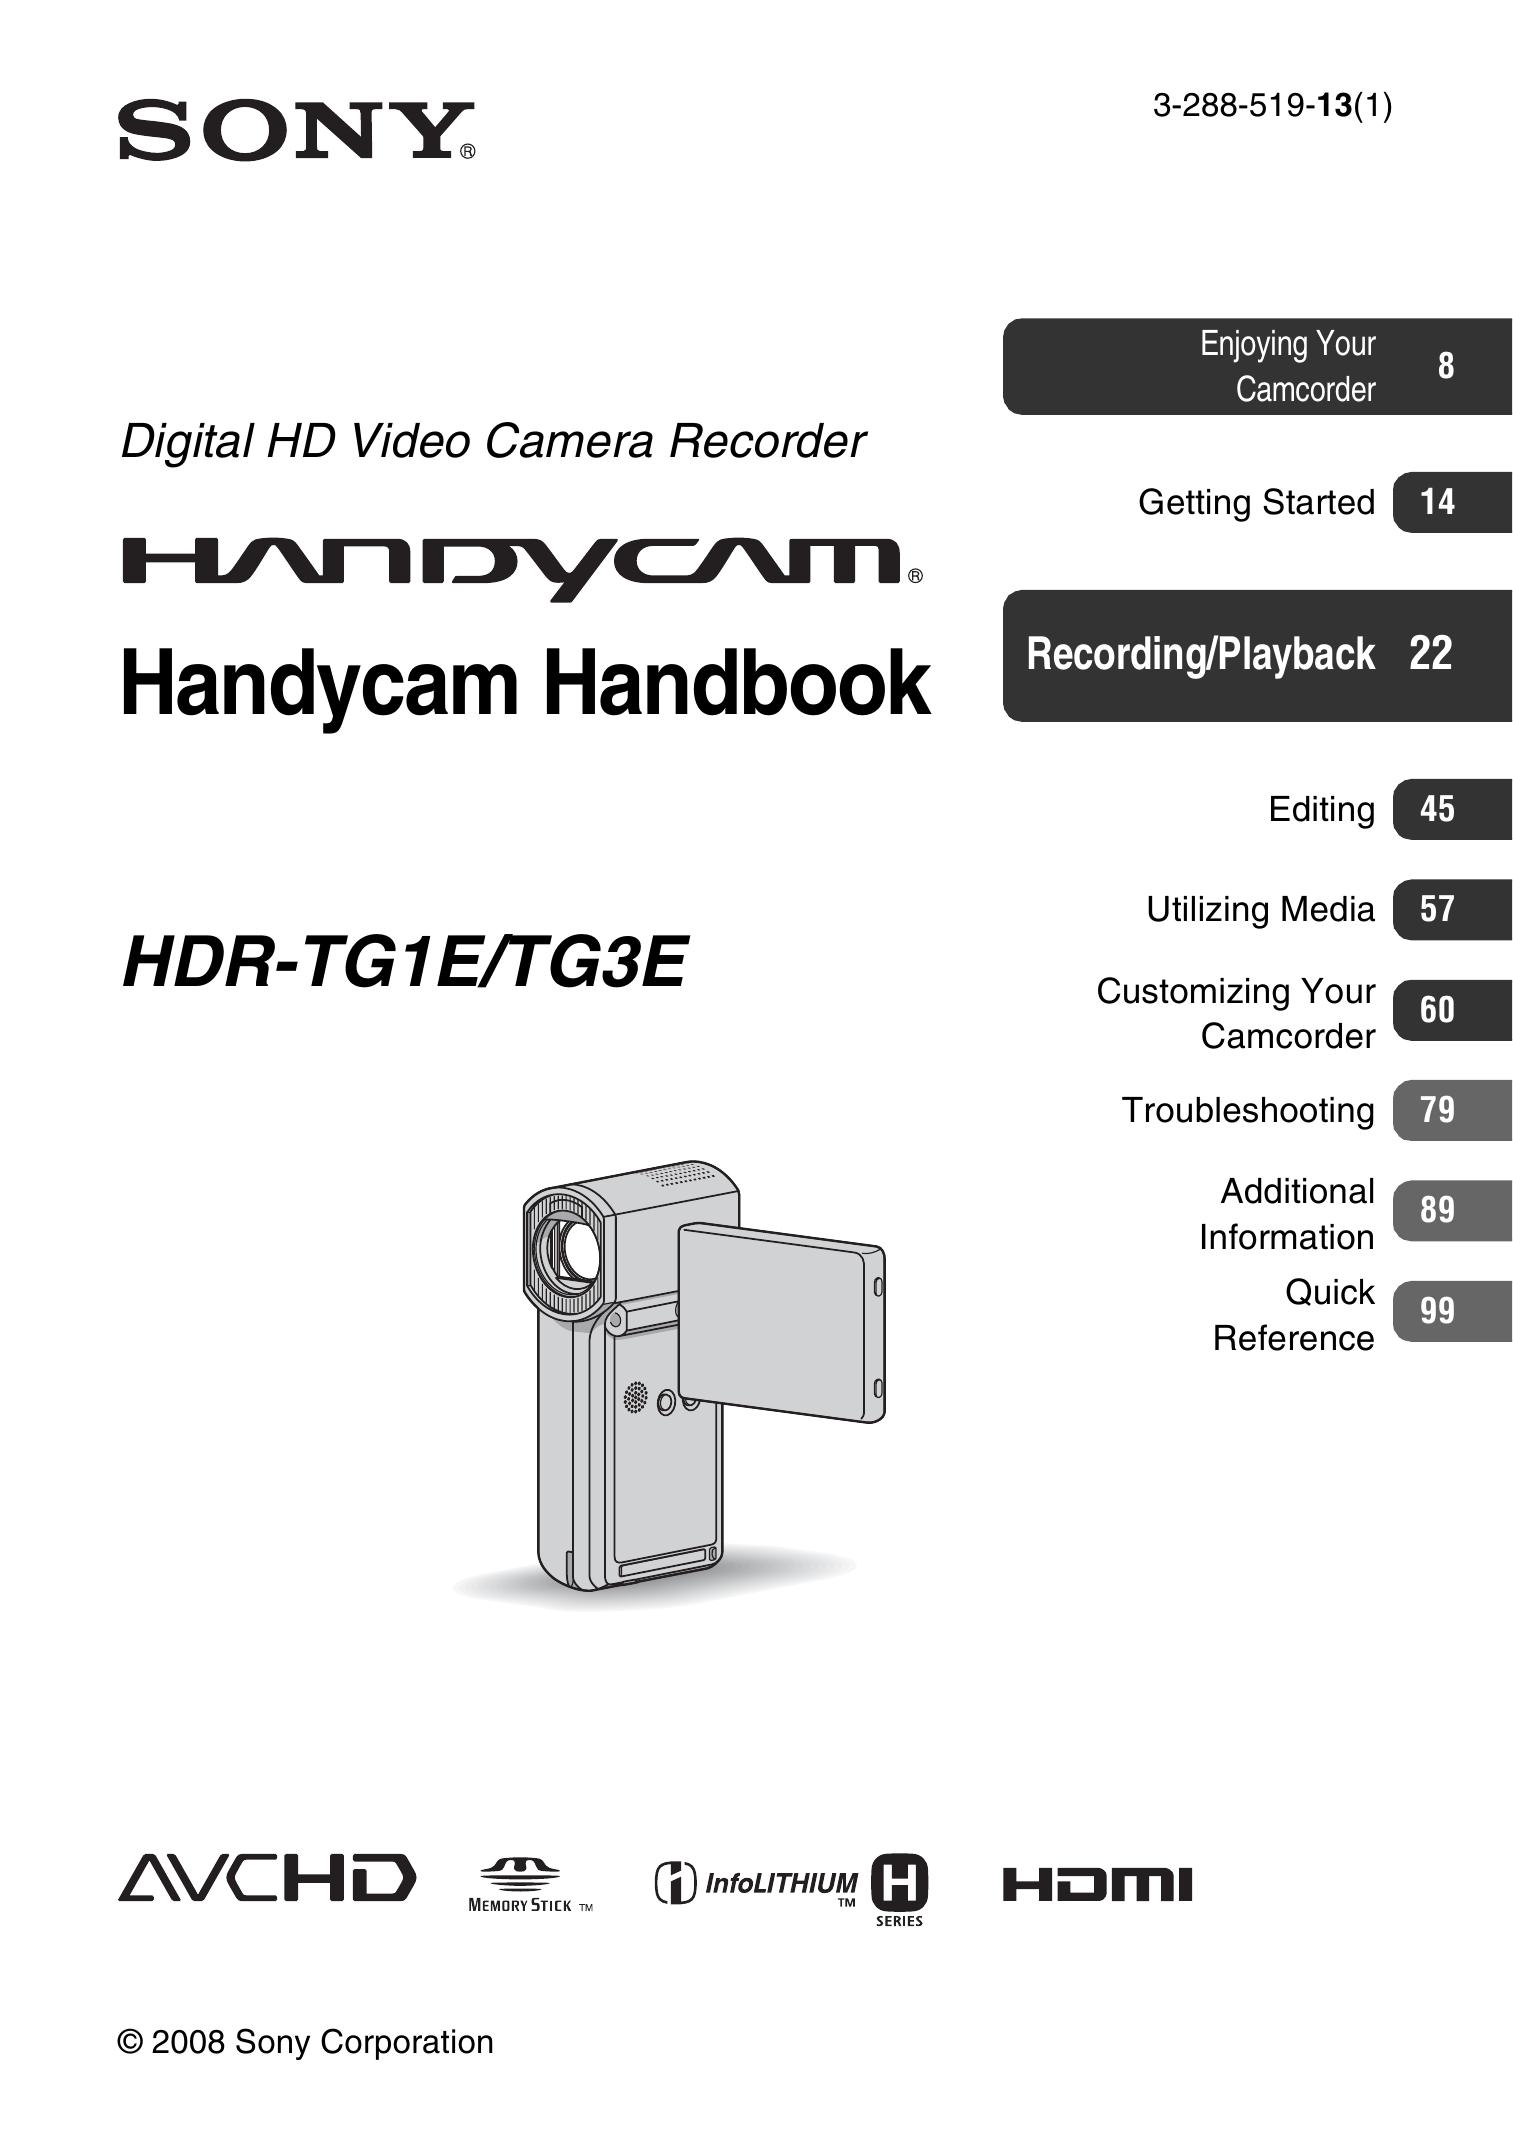 Sony 3-288-519-13(1) Camcorder User Manual